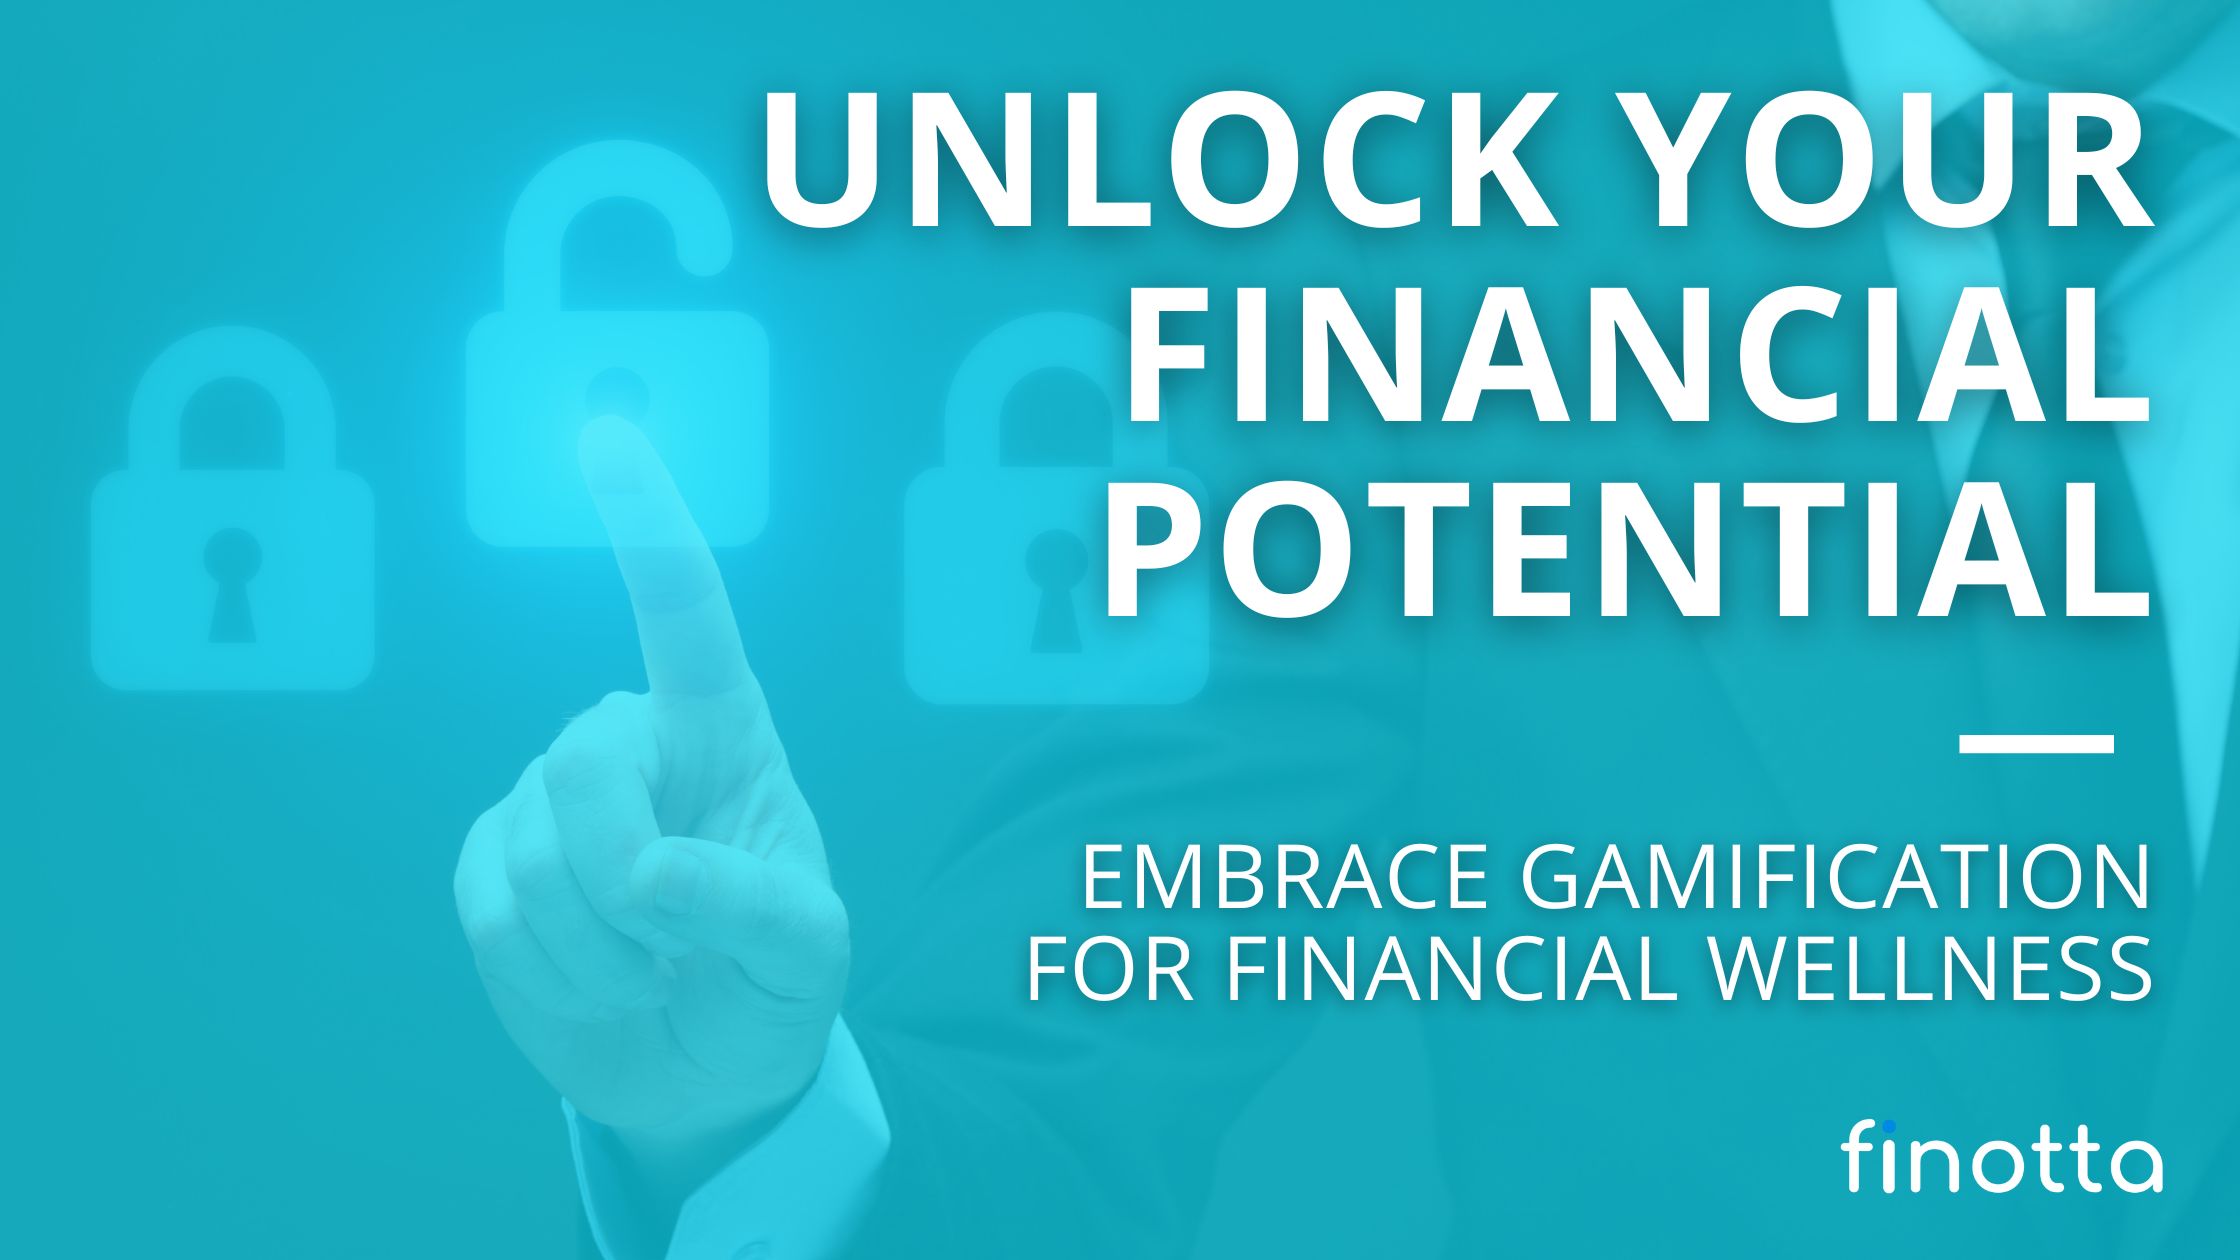 Unlock Your Financial Potential: Embrace Gamification for Financial Wellness